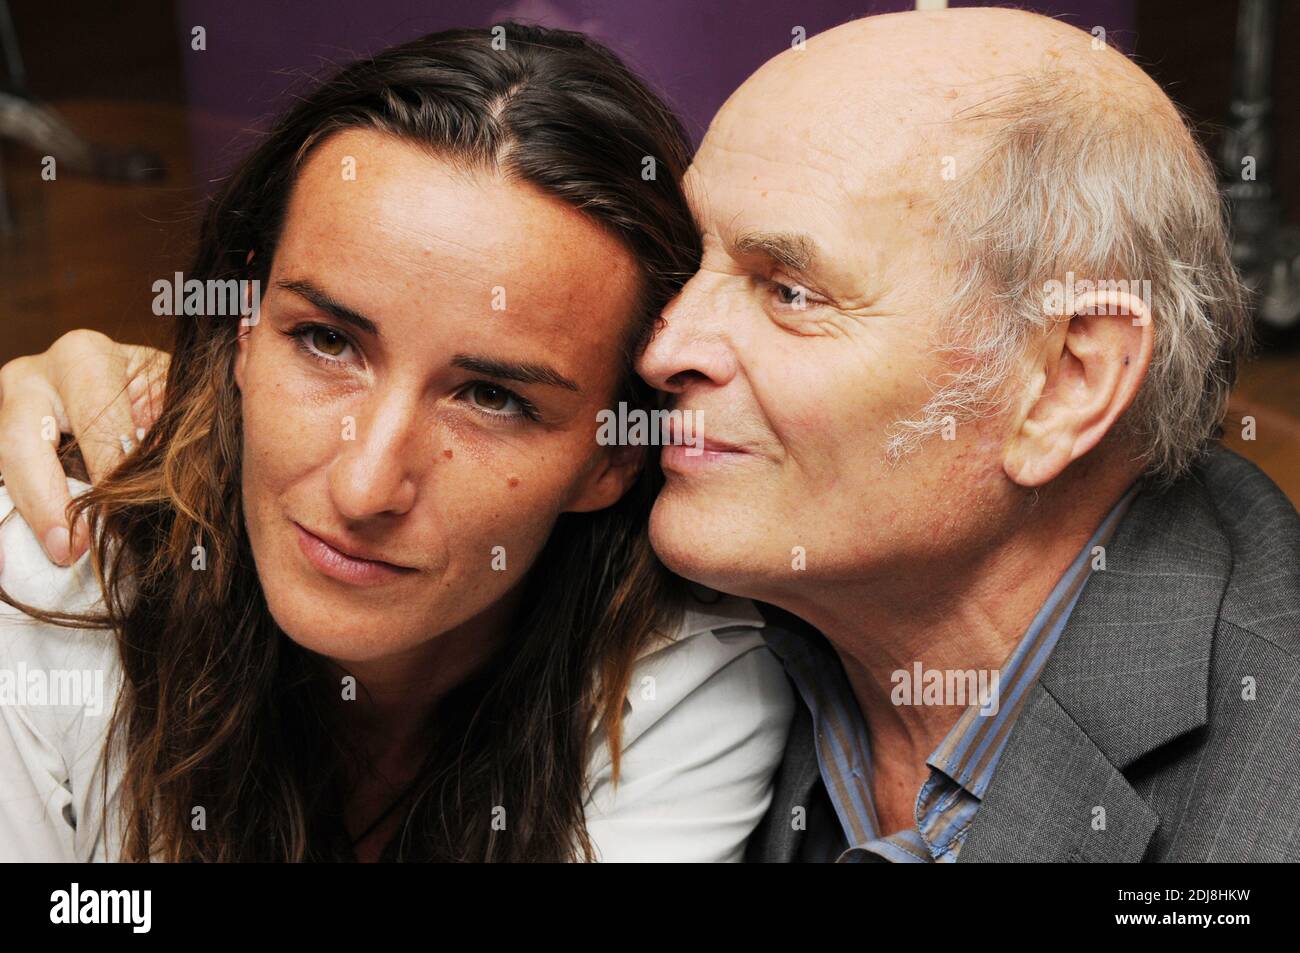 Jean-Francois Stevenin and Salome attending the Jeunesse premiere directed  by Julien Samani in Paris, France on September 6, 2016. Photo by Alain  Apaydin/ABACAPRESS.COM Stock Photo - Alamy